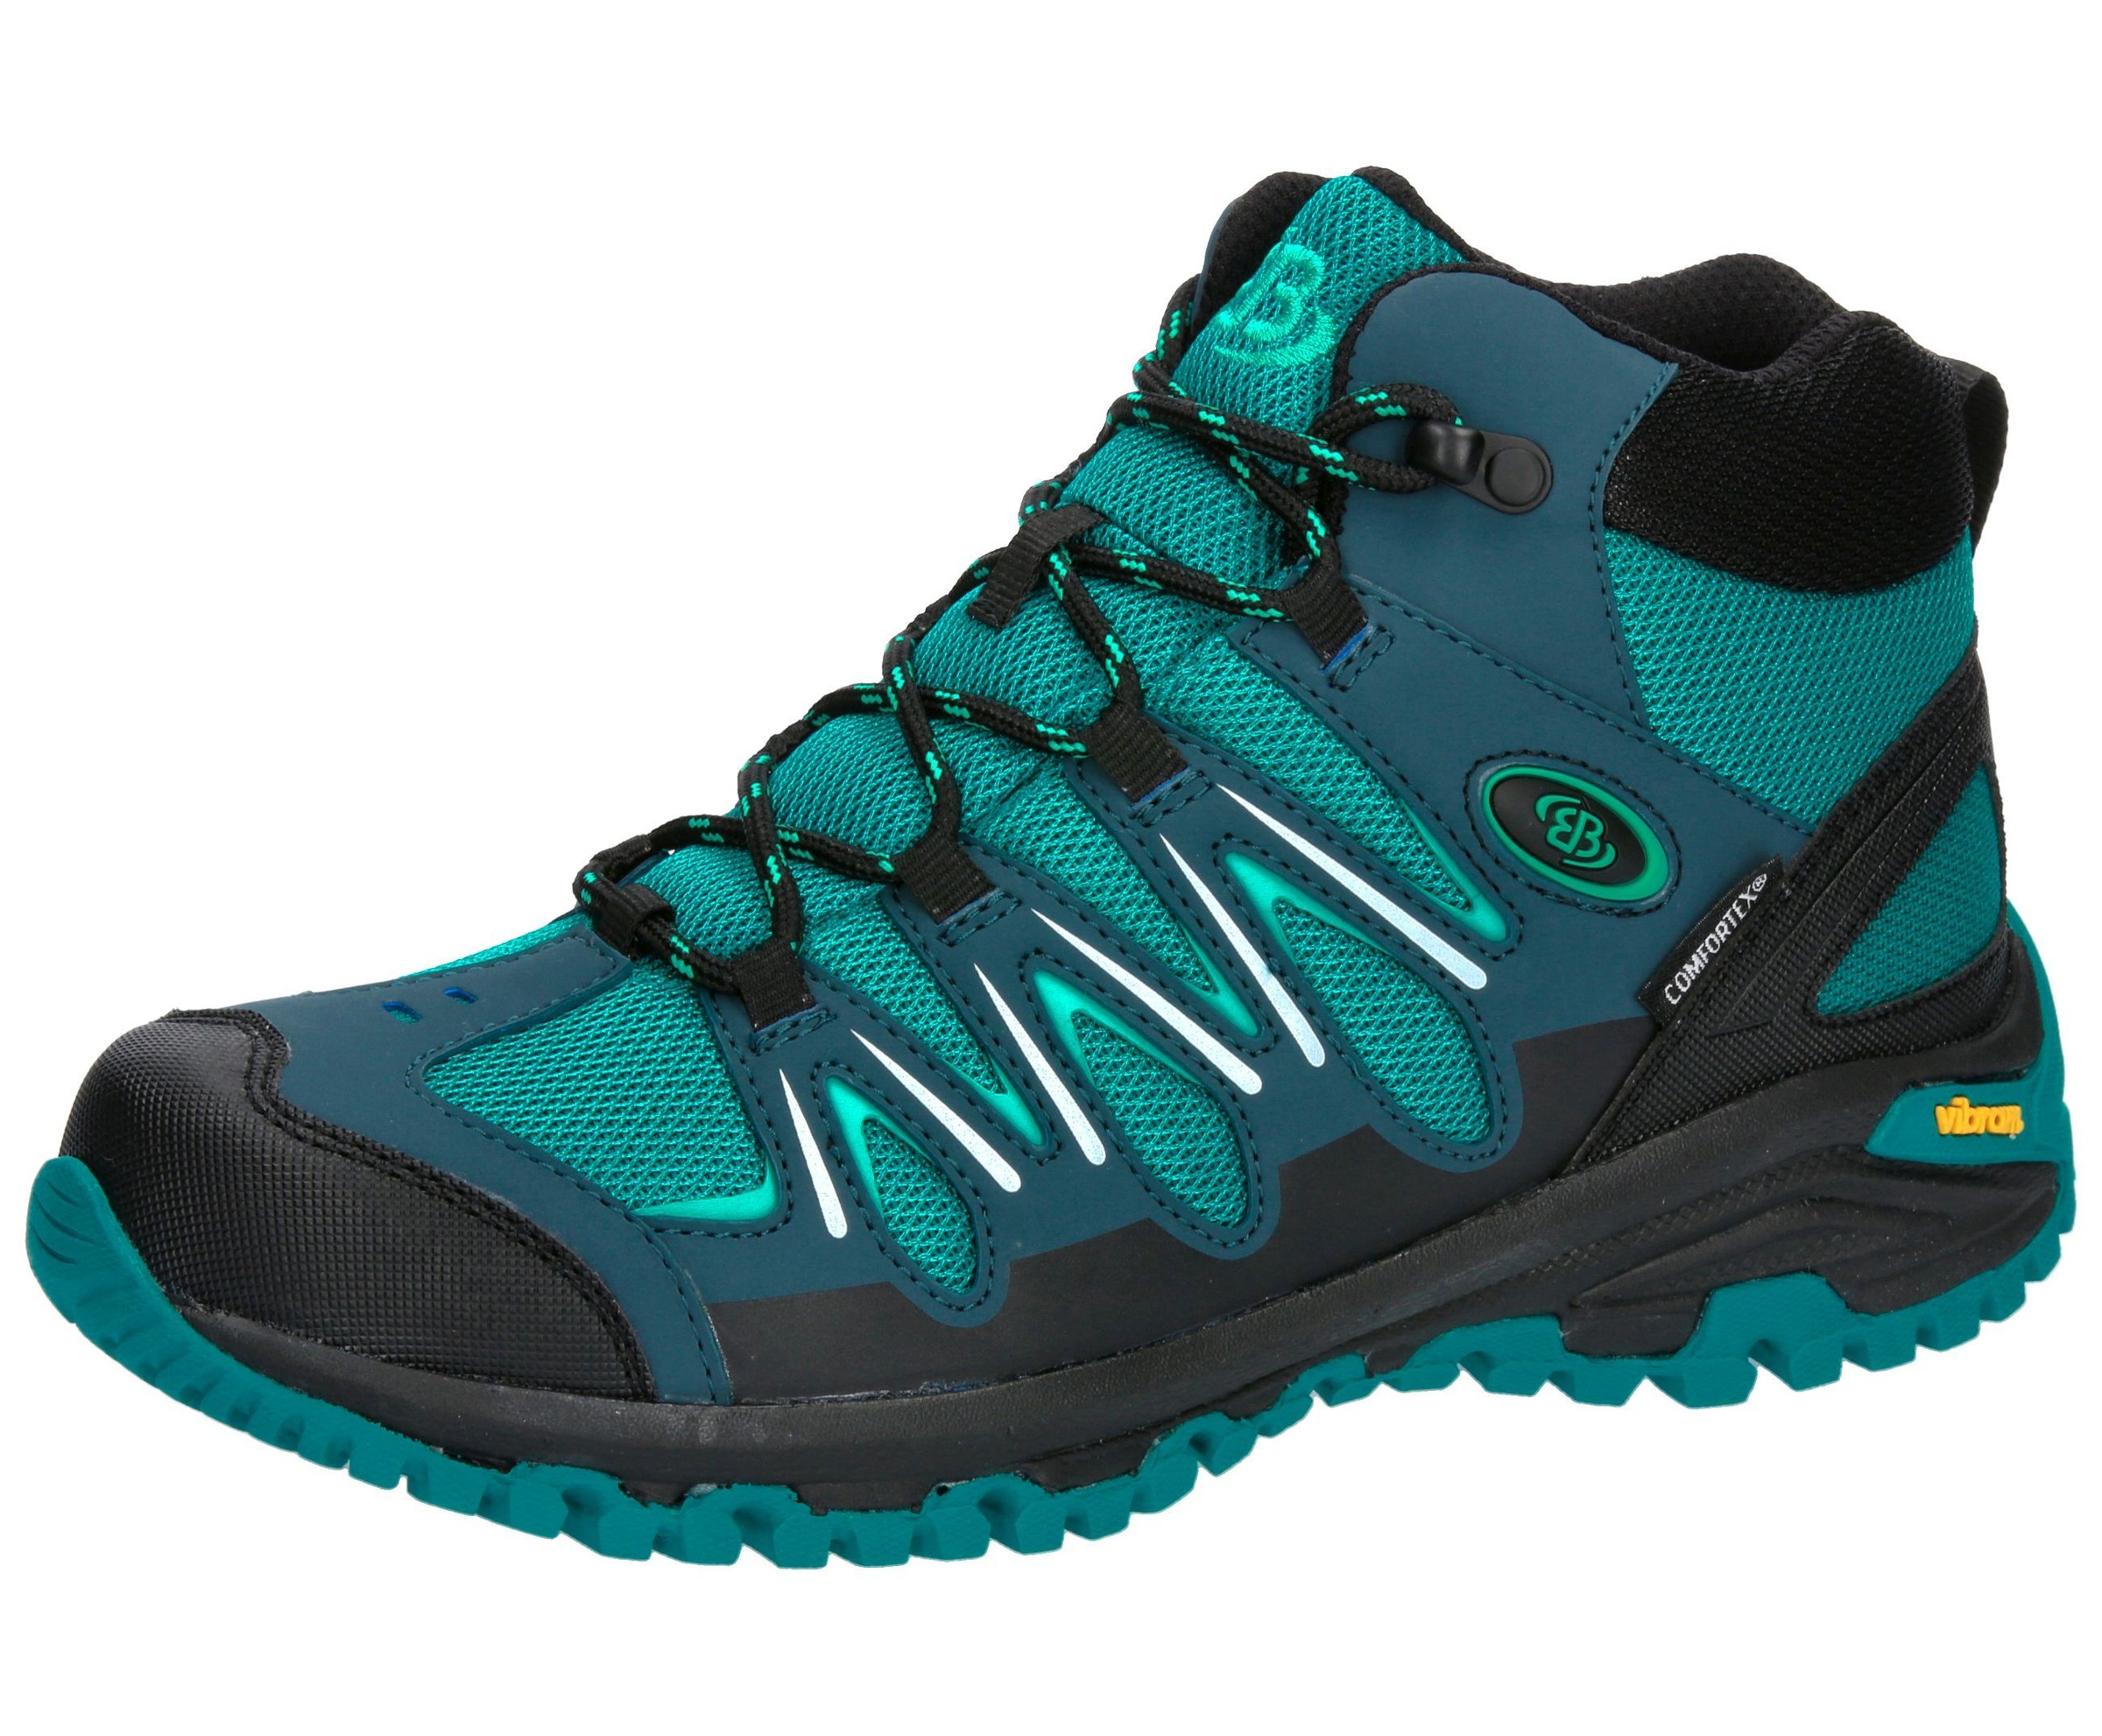 BRÜTTING Outdoorschuh "Outdoorstiefel Expedition Mid"